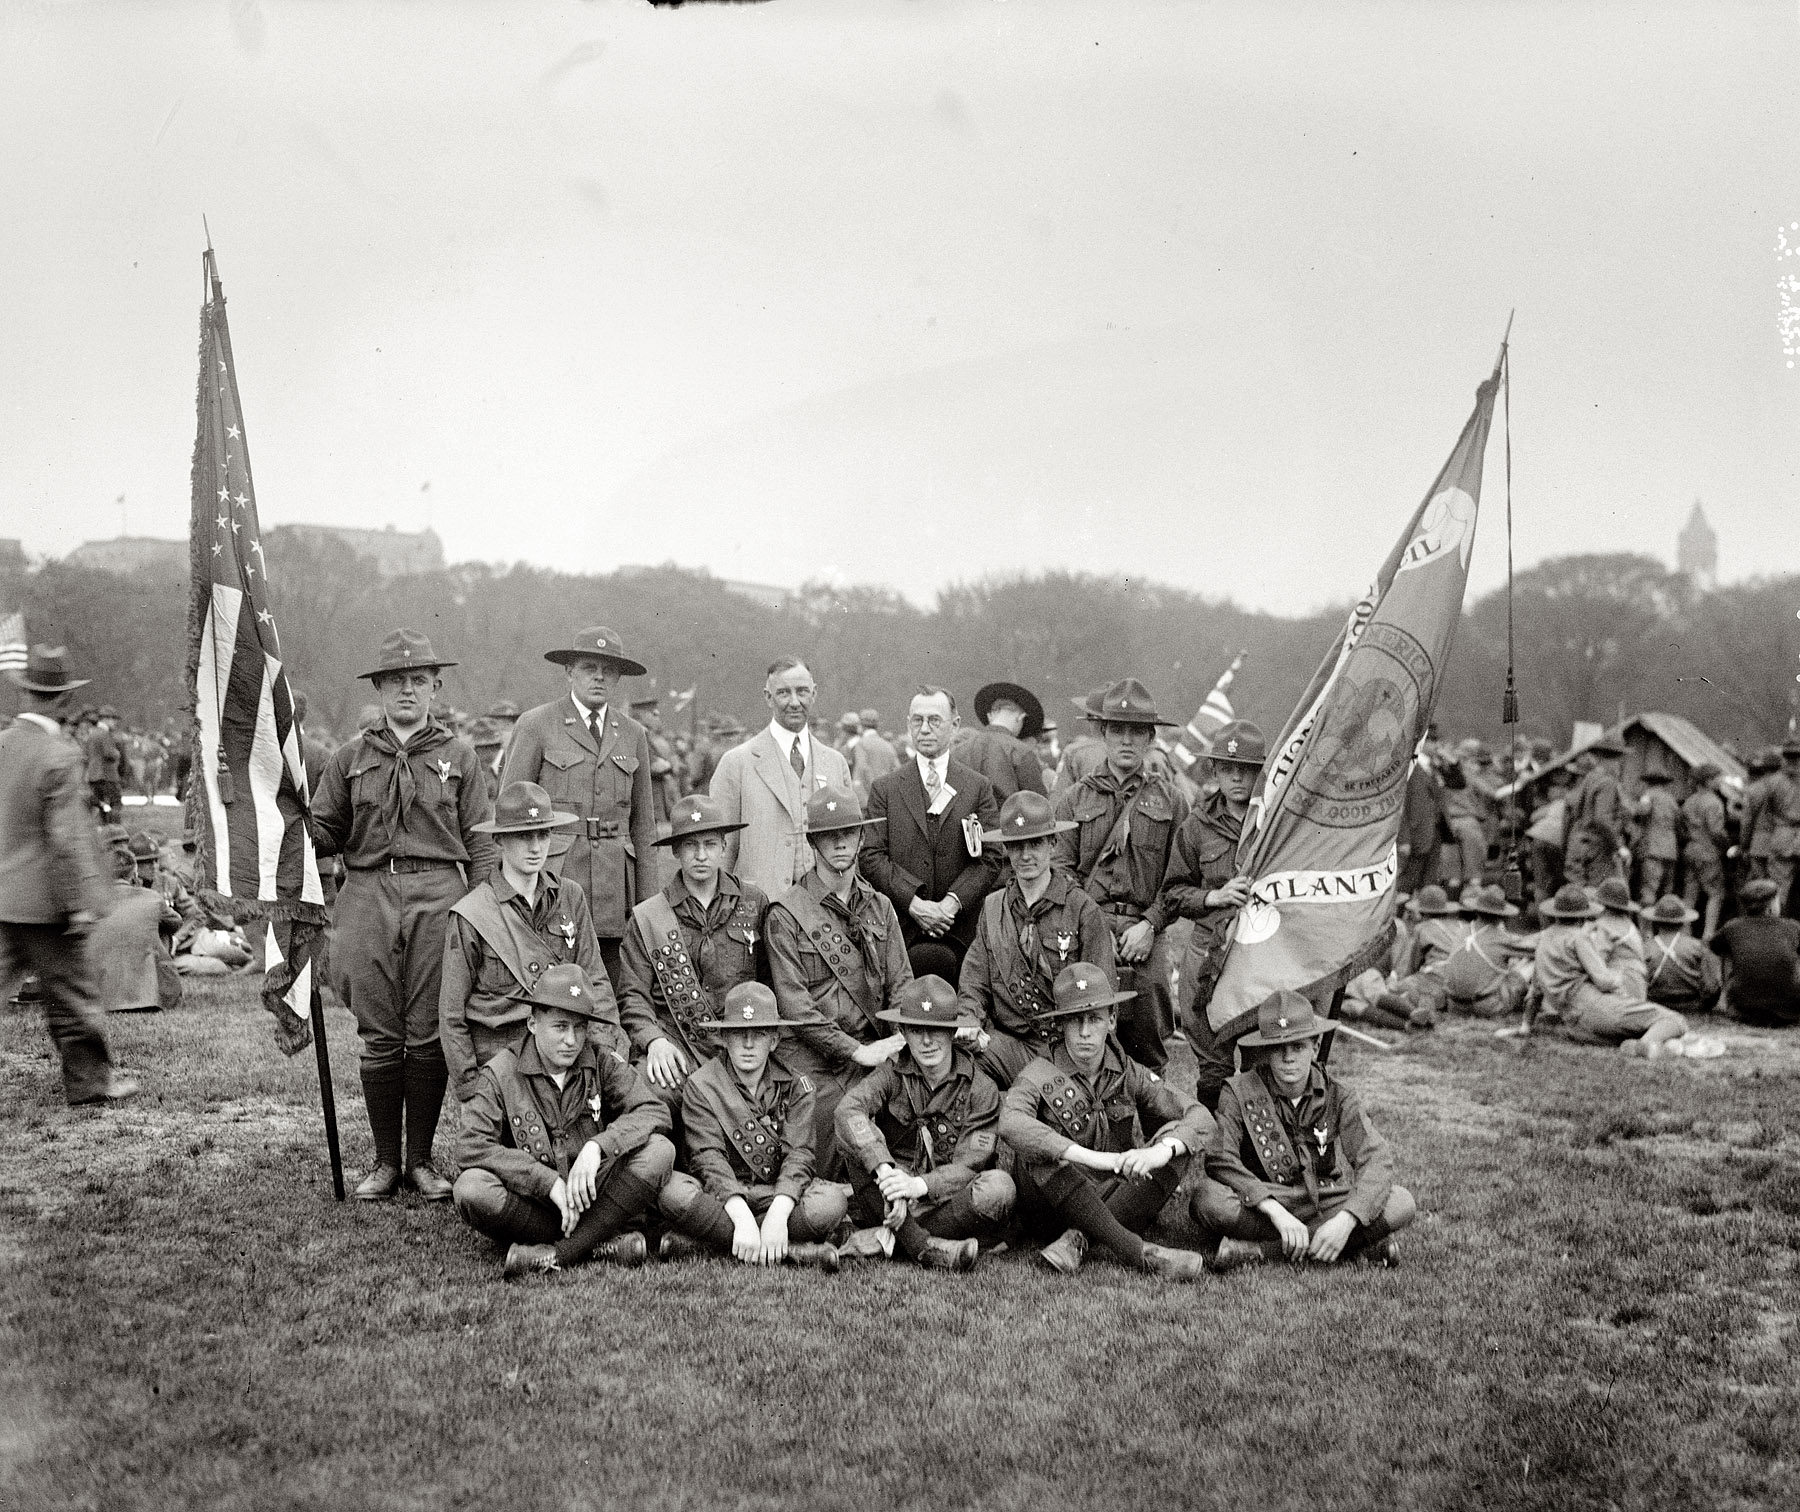 Washington, D.C., 1926. "Atlantic City Boy Scouts on Ellipse." National Photo Company Collection glass negative, Library of Congress. View full size.